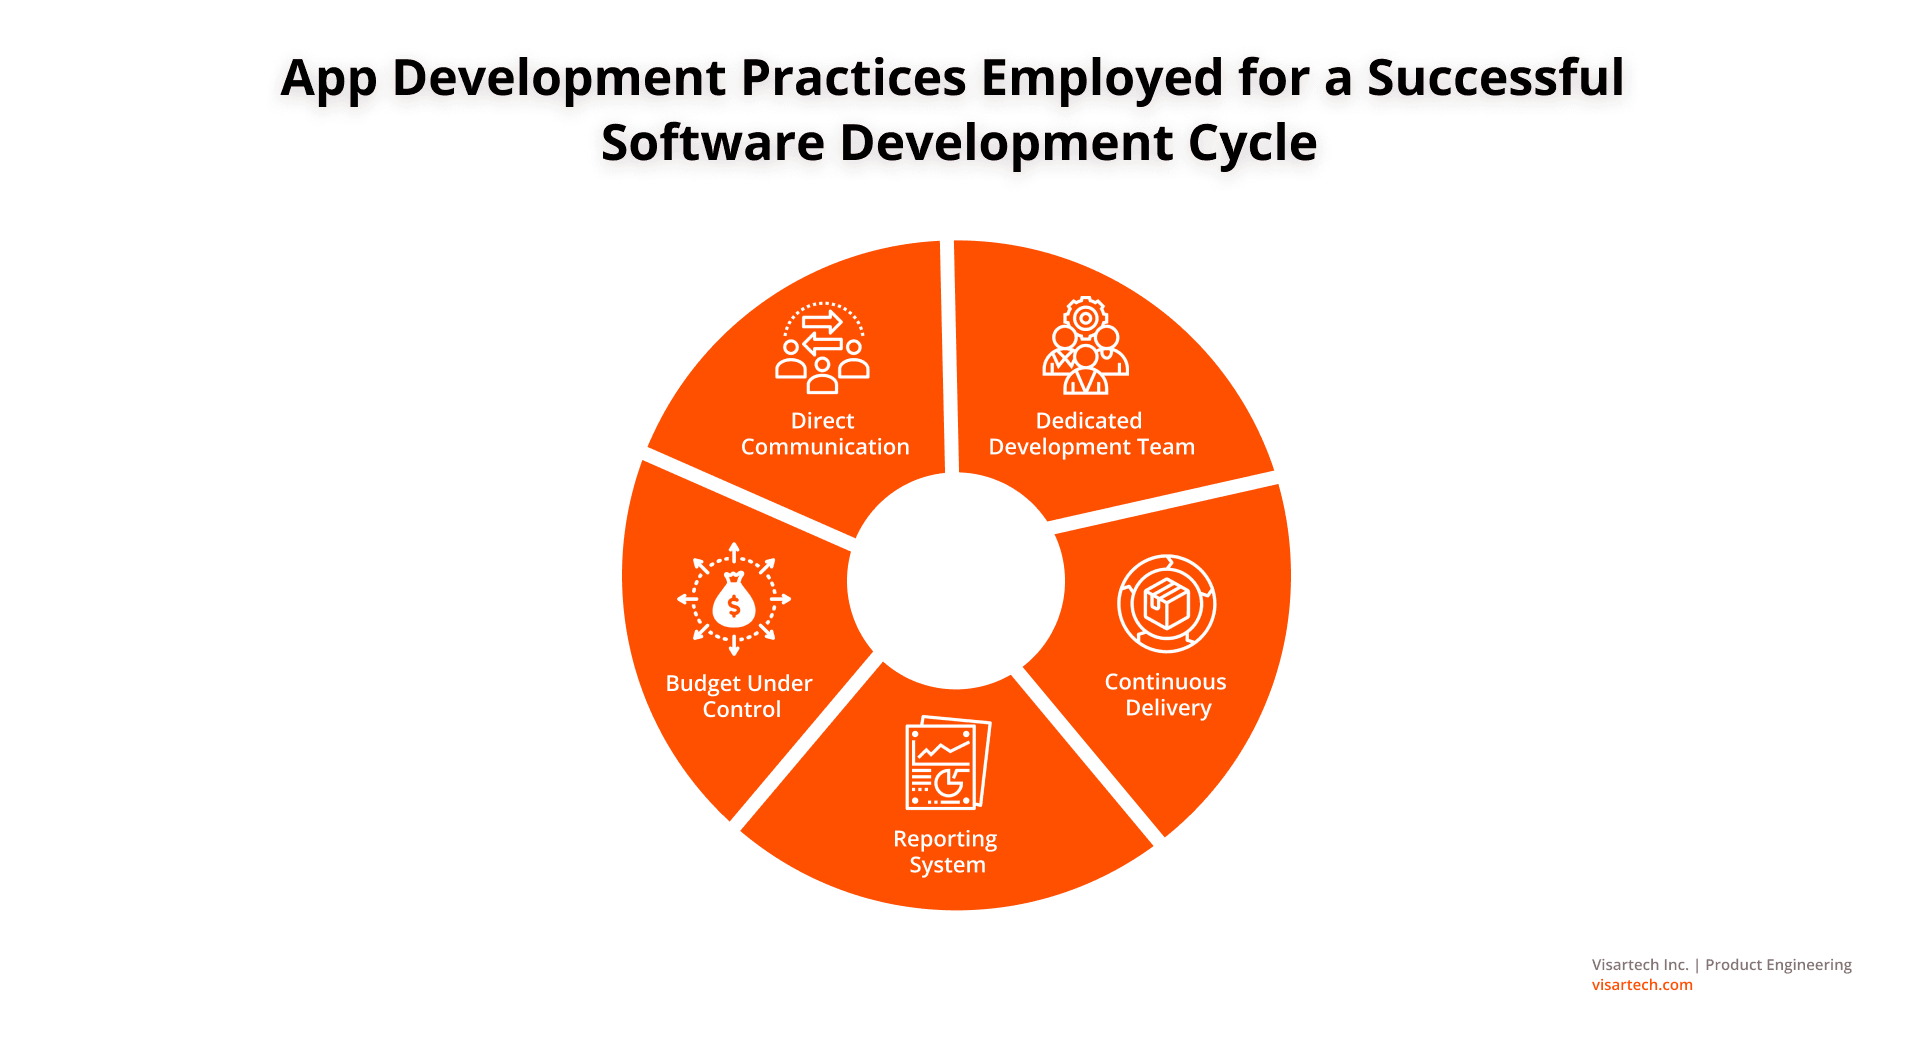 App Development Practices Employed for a Successful Software Development Cycle - Visartech Blog